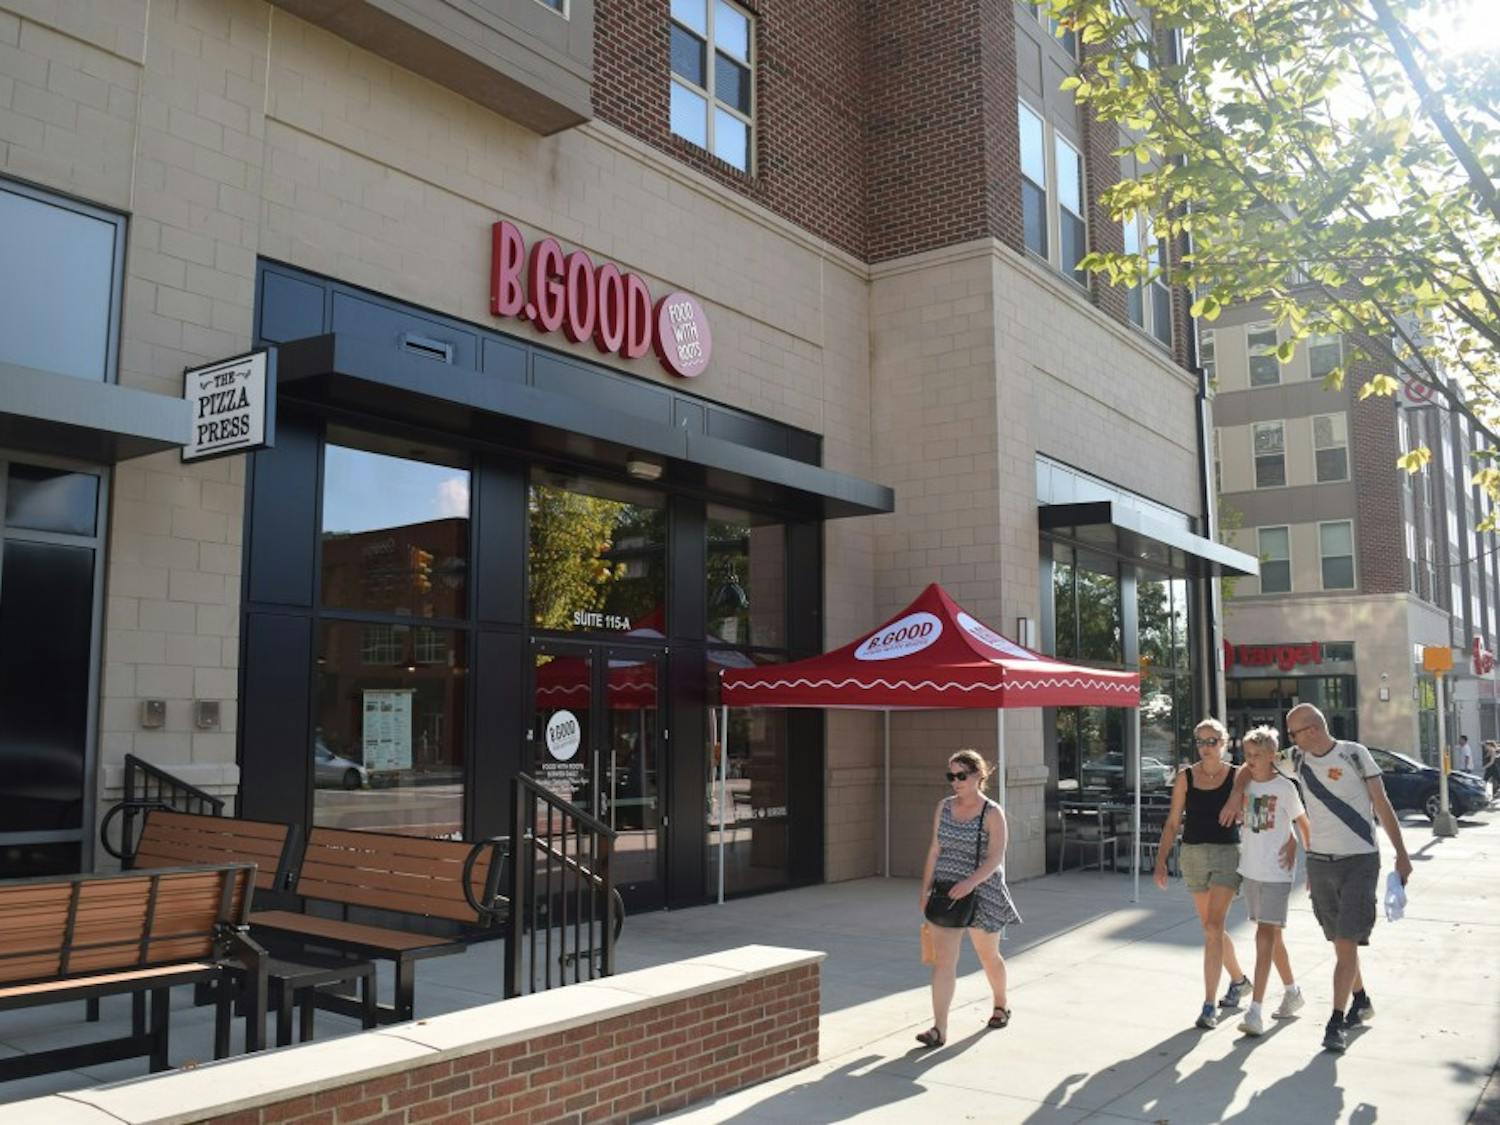 B. Good opened next to Target on Franklin, and serves food from sustainable sources.